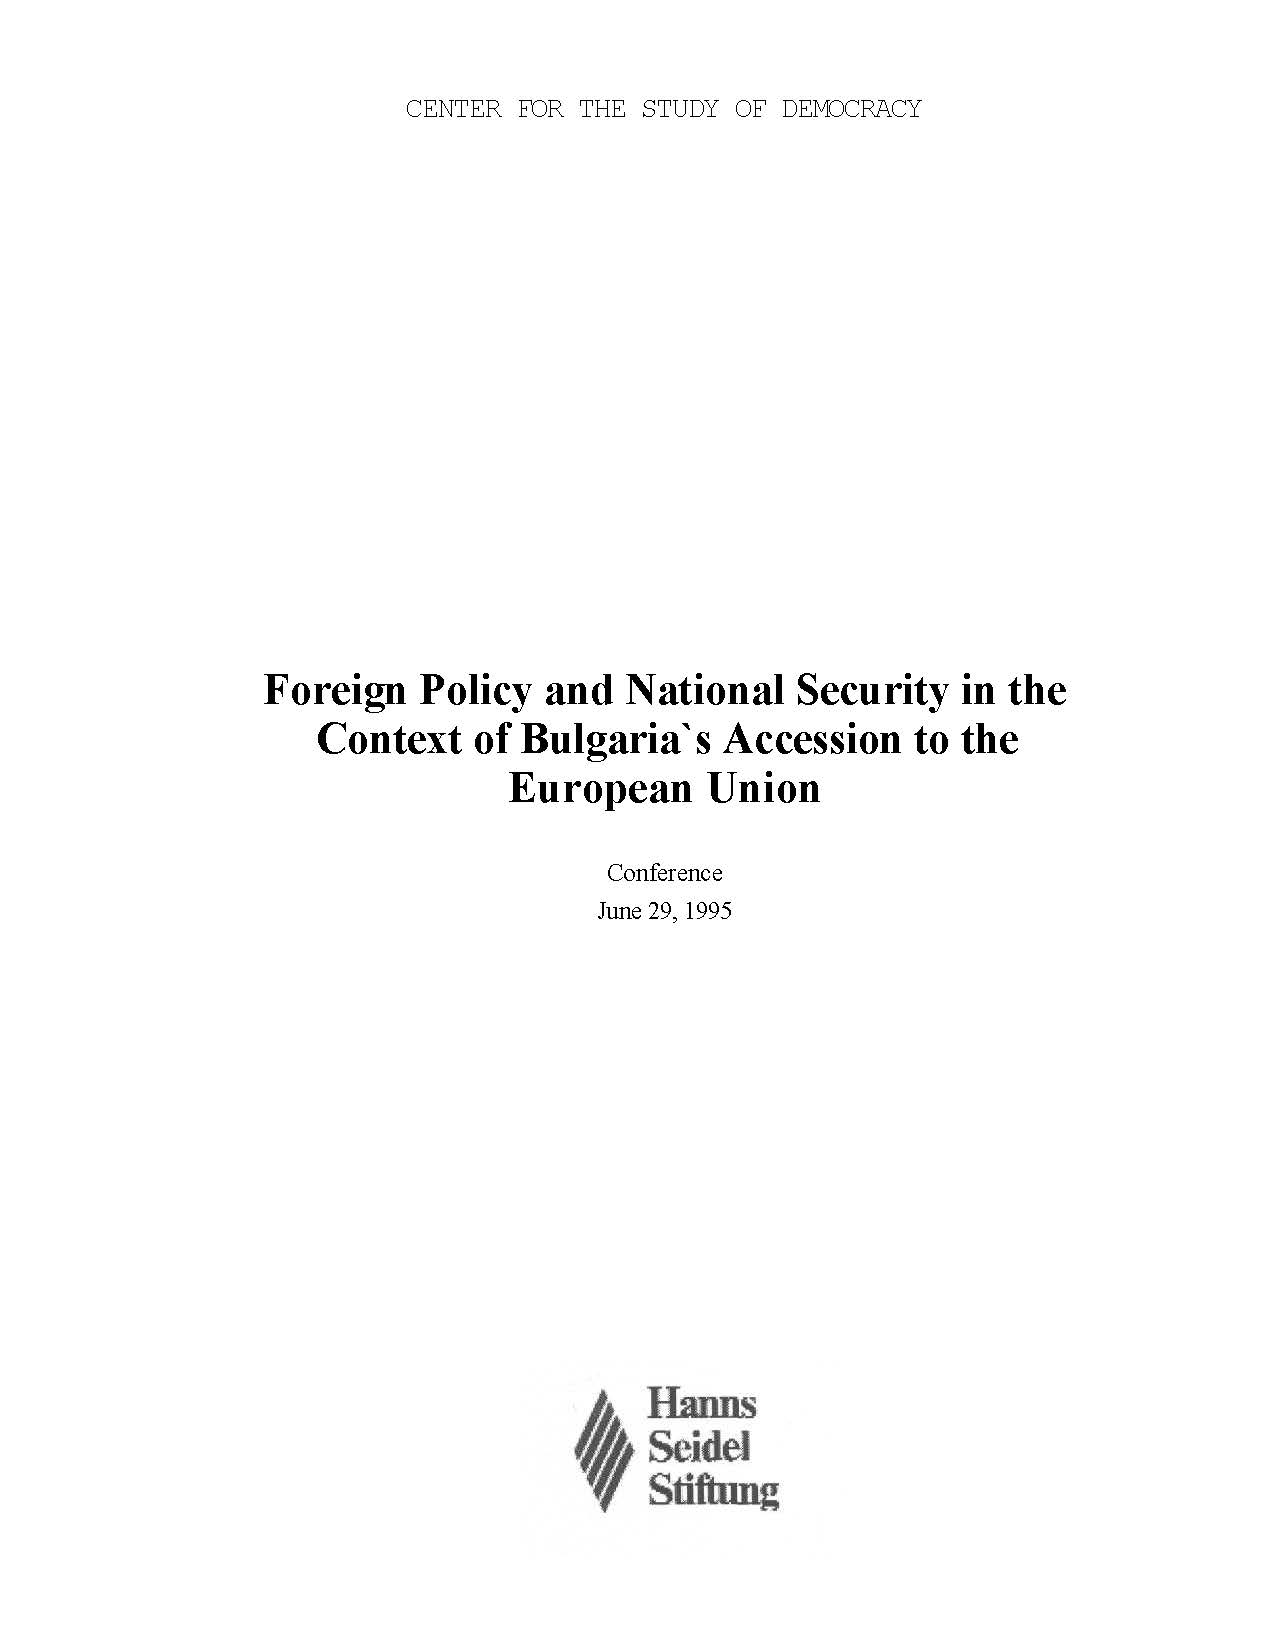 Foreign Policy and National Security in the Context of Bulgaria`s Accession to the European Union